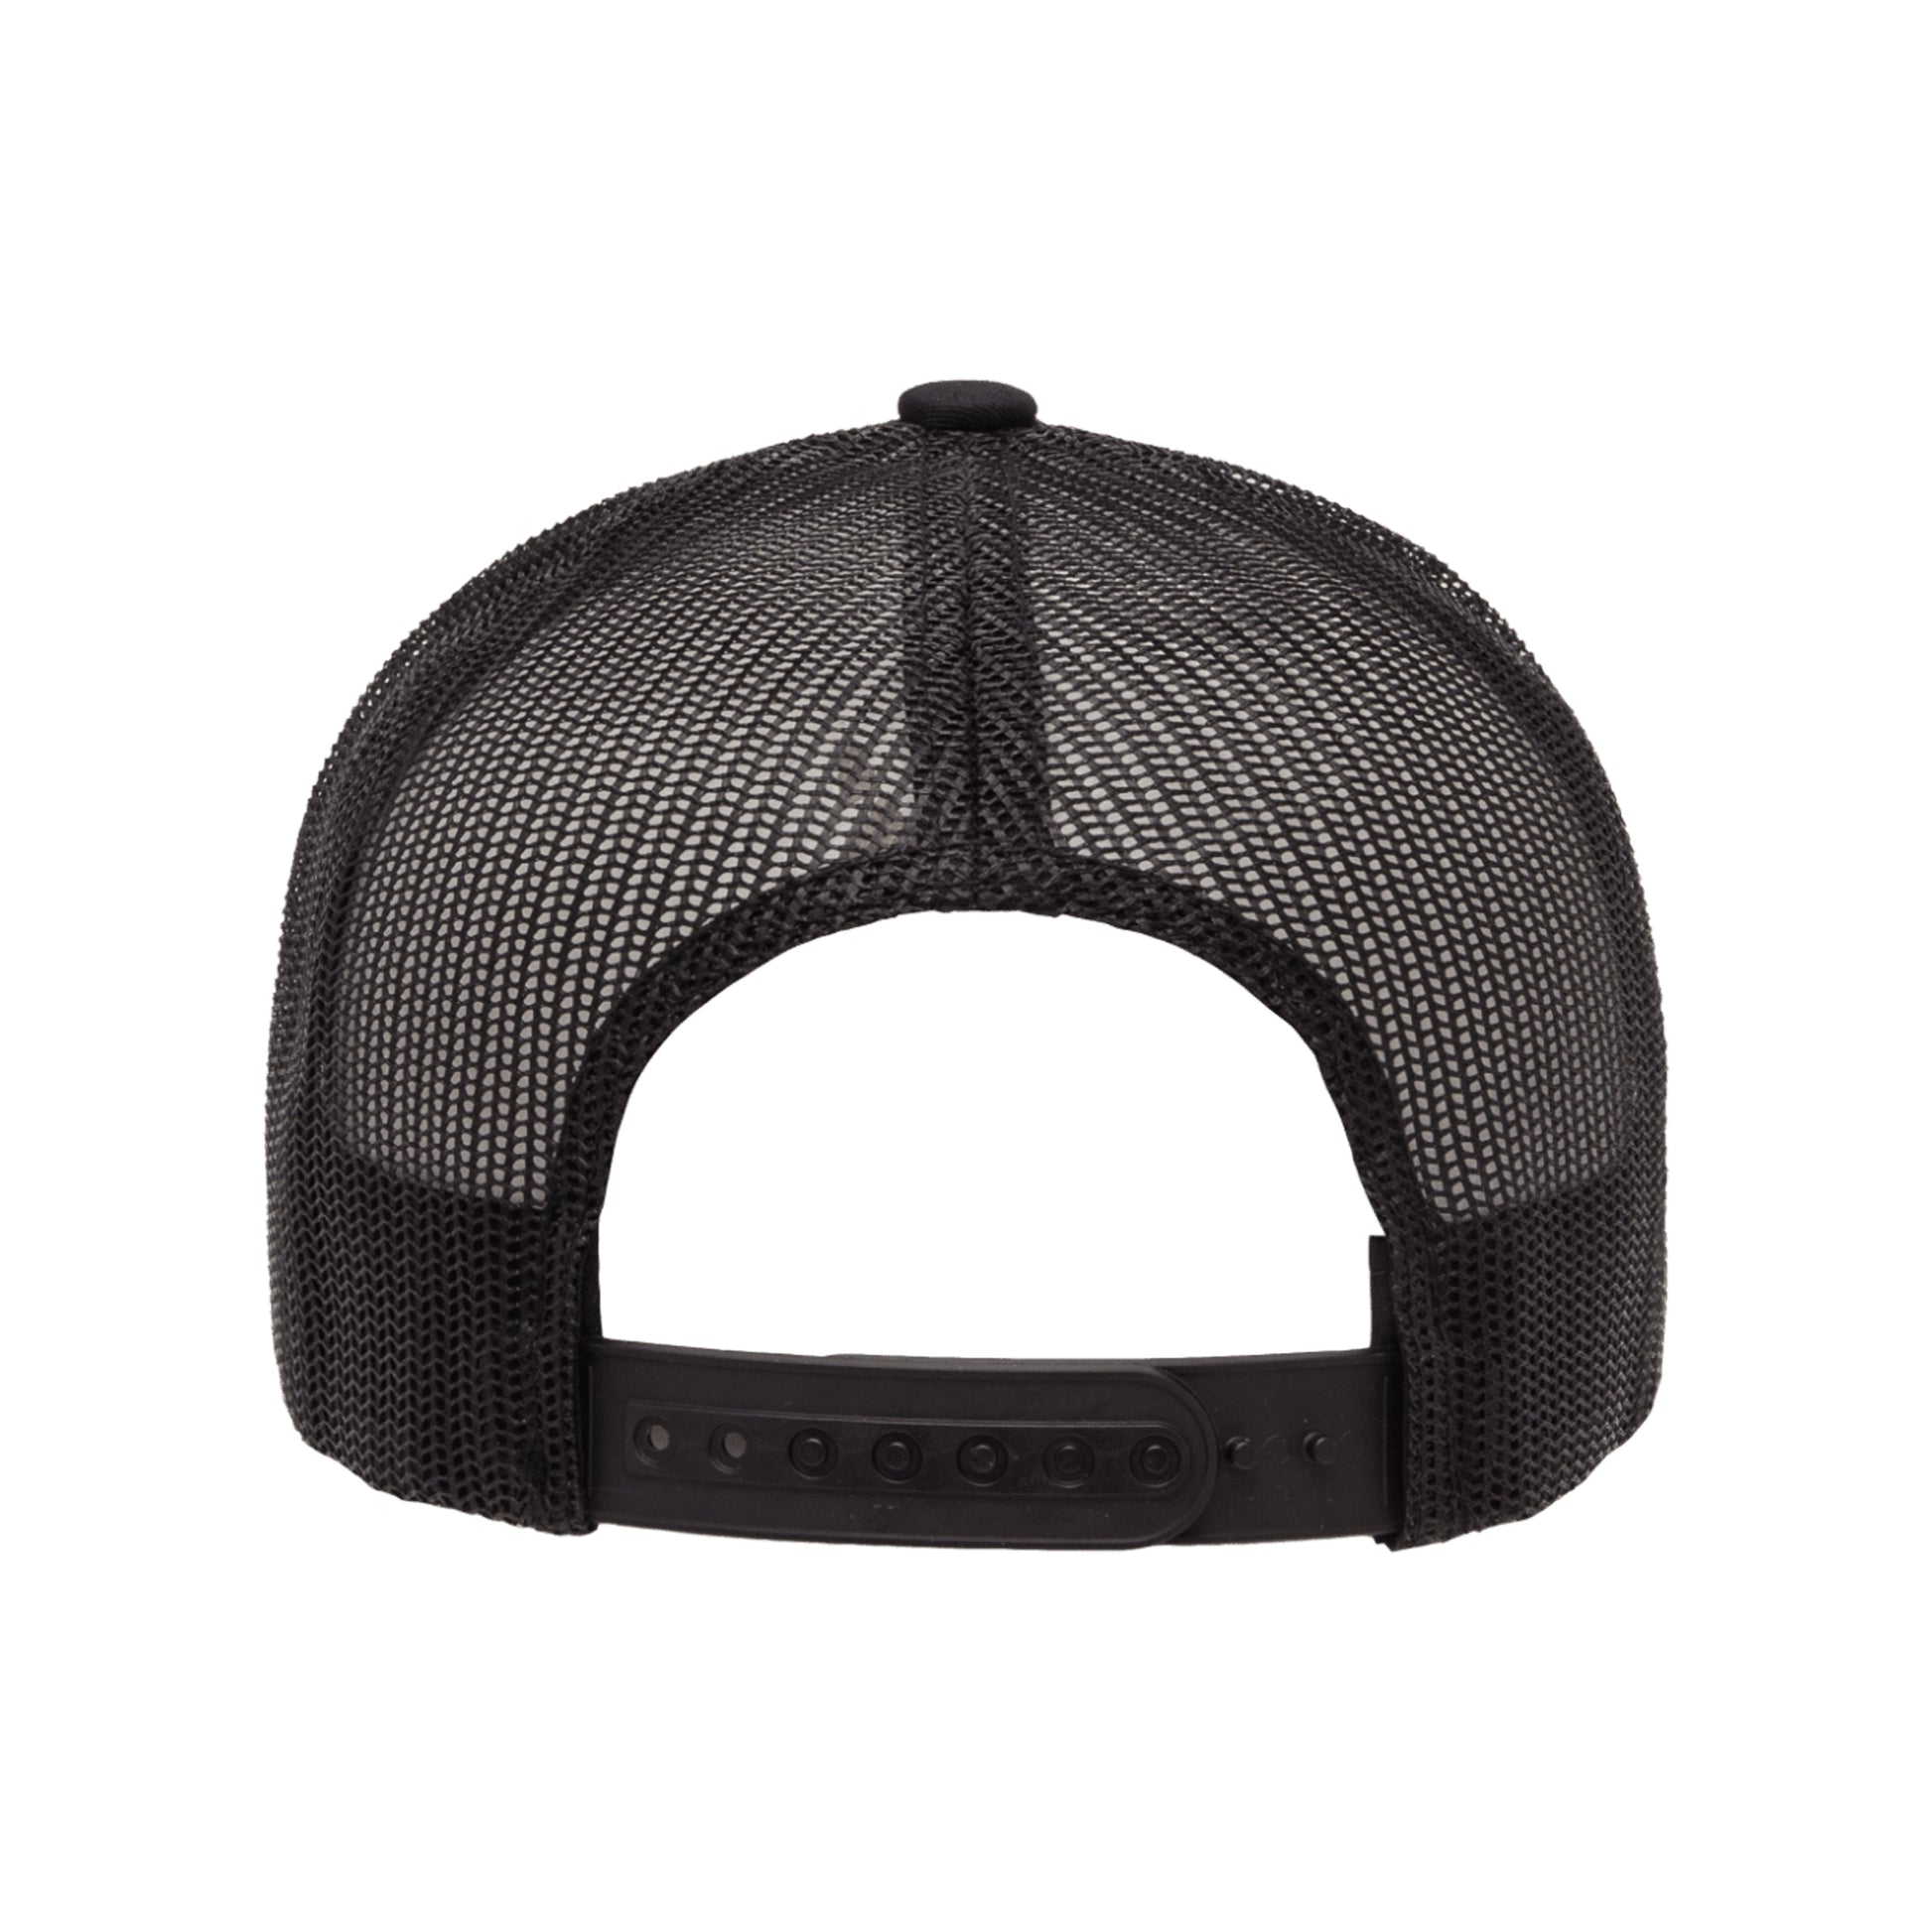 Classic black snapback hat with bold I Miss My Stylist text by BBJ / Glitter Garage. Glitter and matte vinyl colour options. Unisex style, breathable mesh back with matching plastic snap closure fits most. Back view.